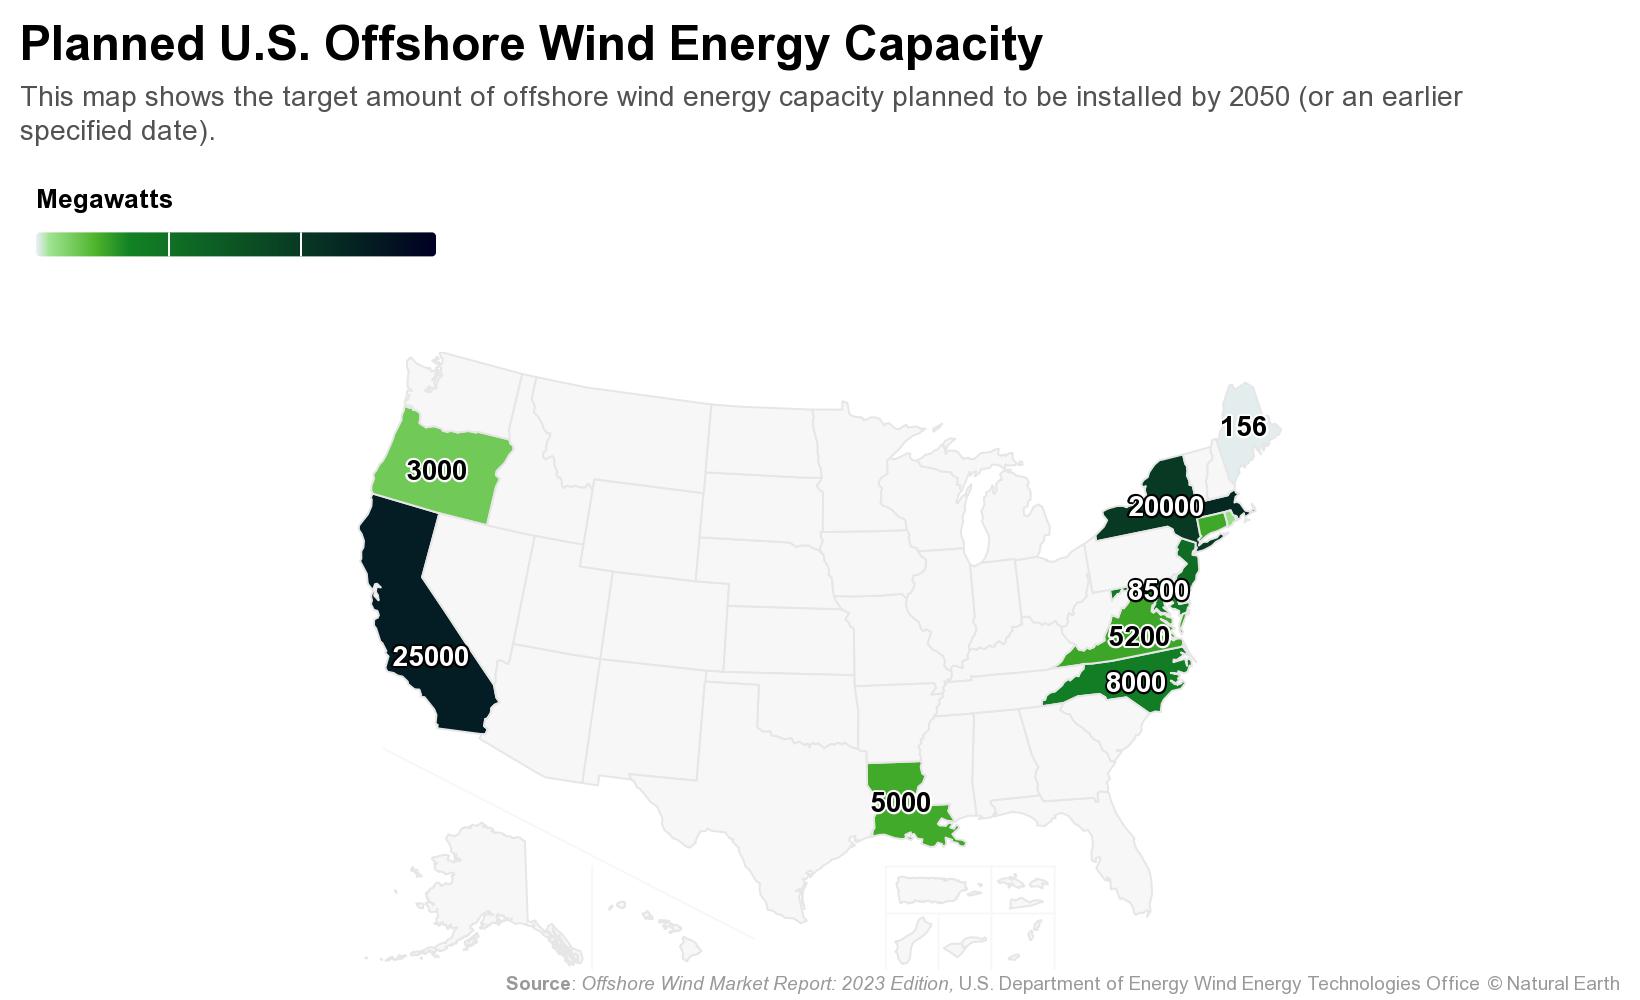 Planned US offshore wind capacity